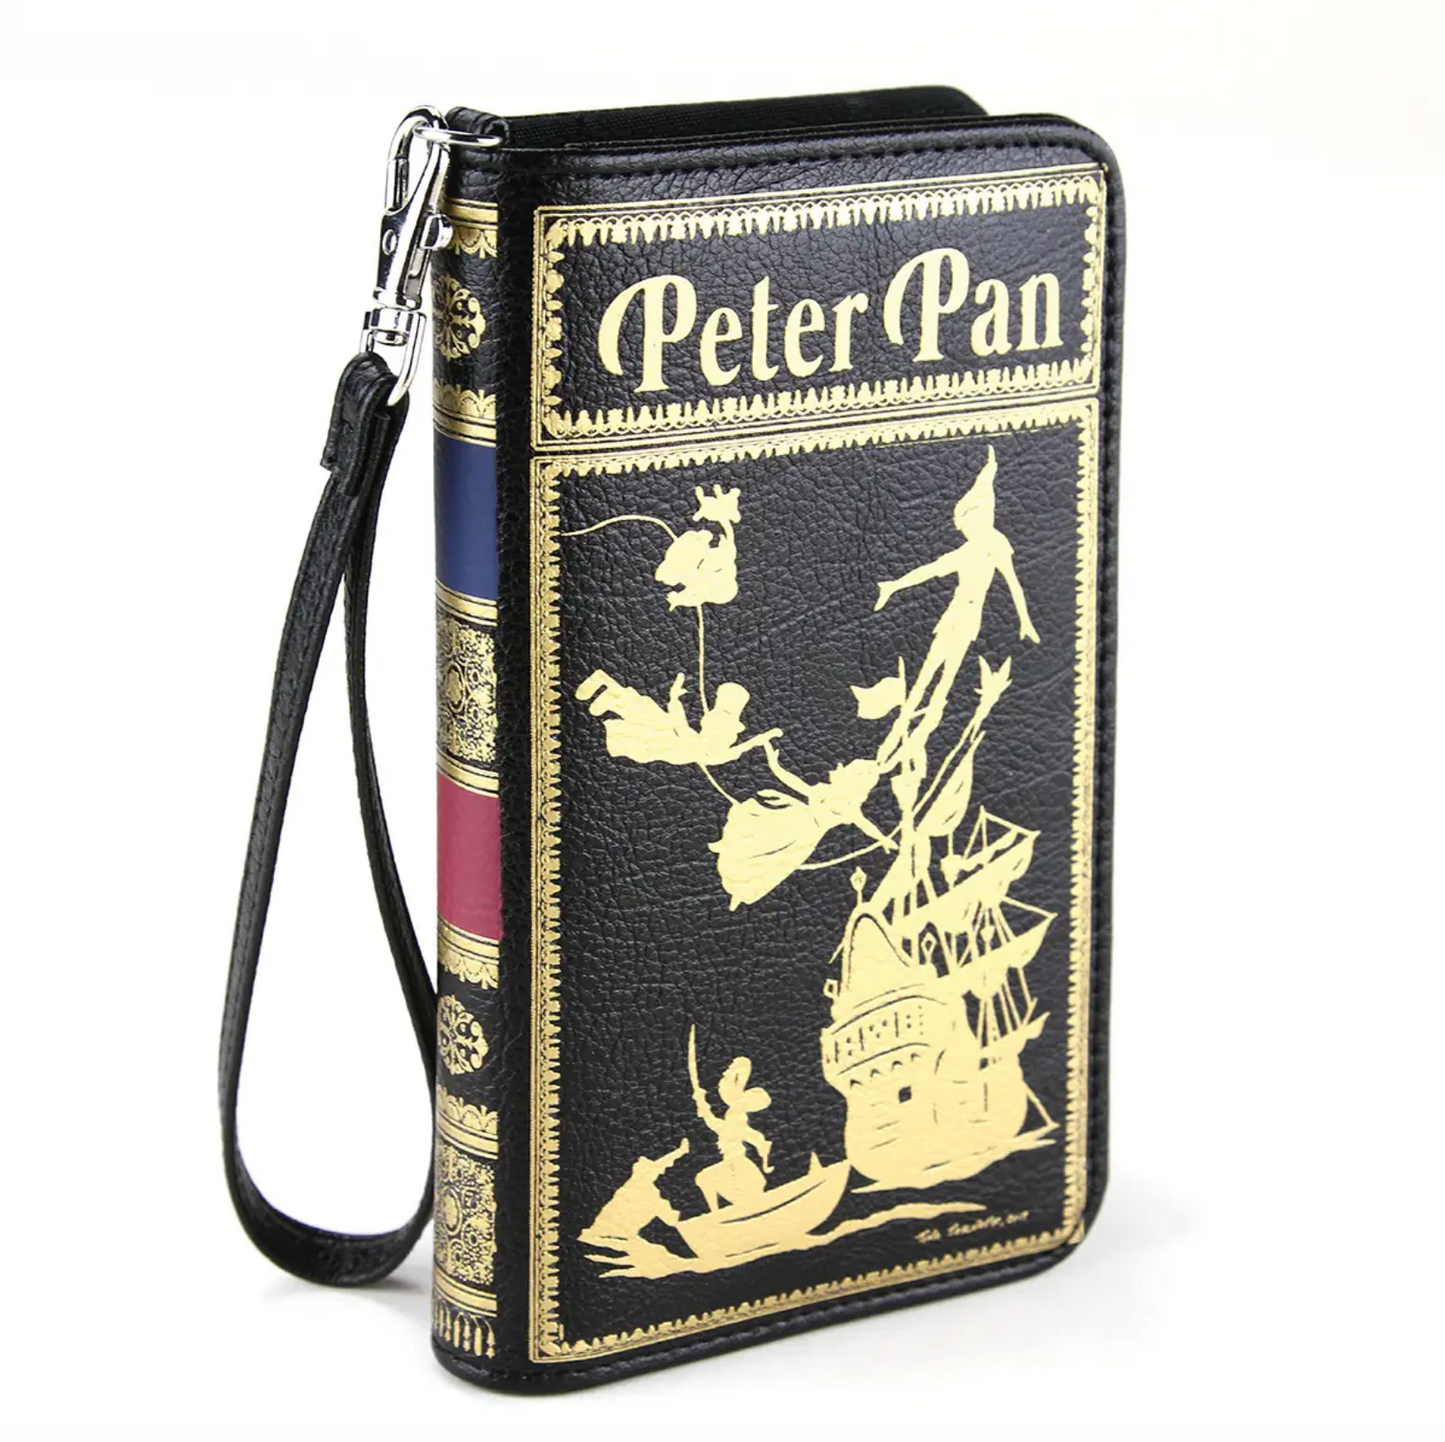 Peter Pan By: J.M. Barrie Book Wallet With Wrist Strap